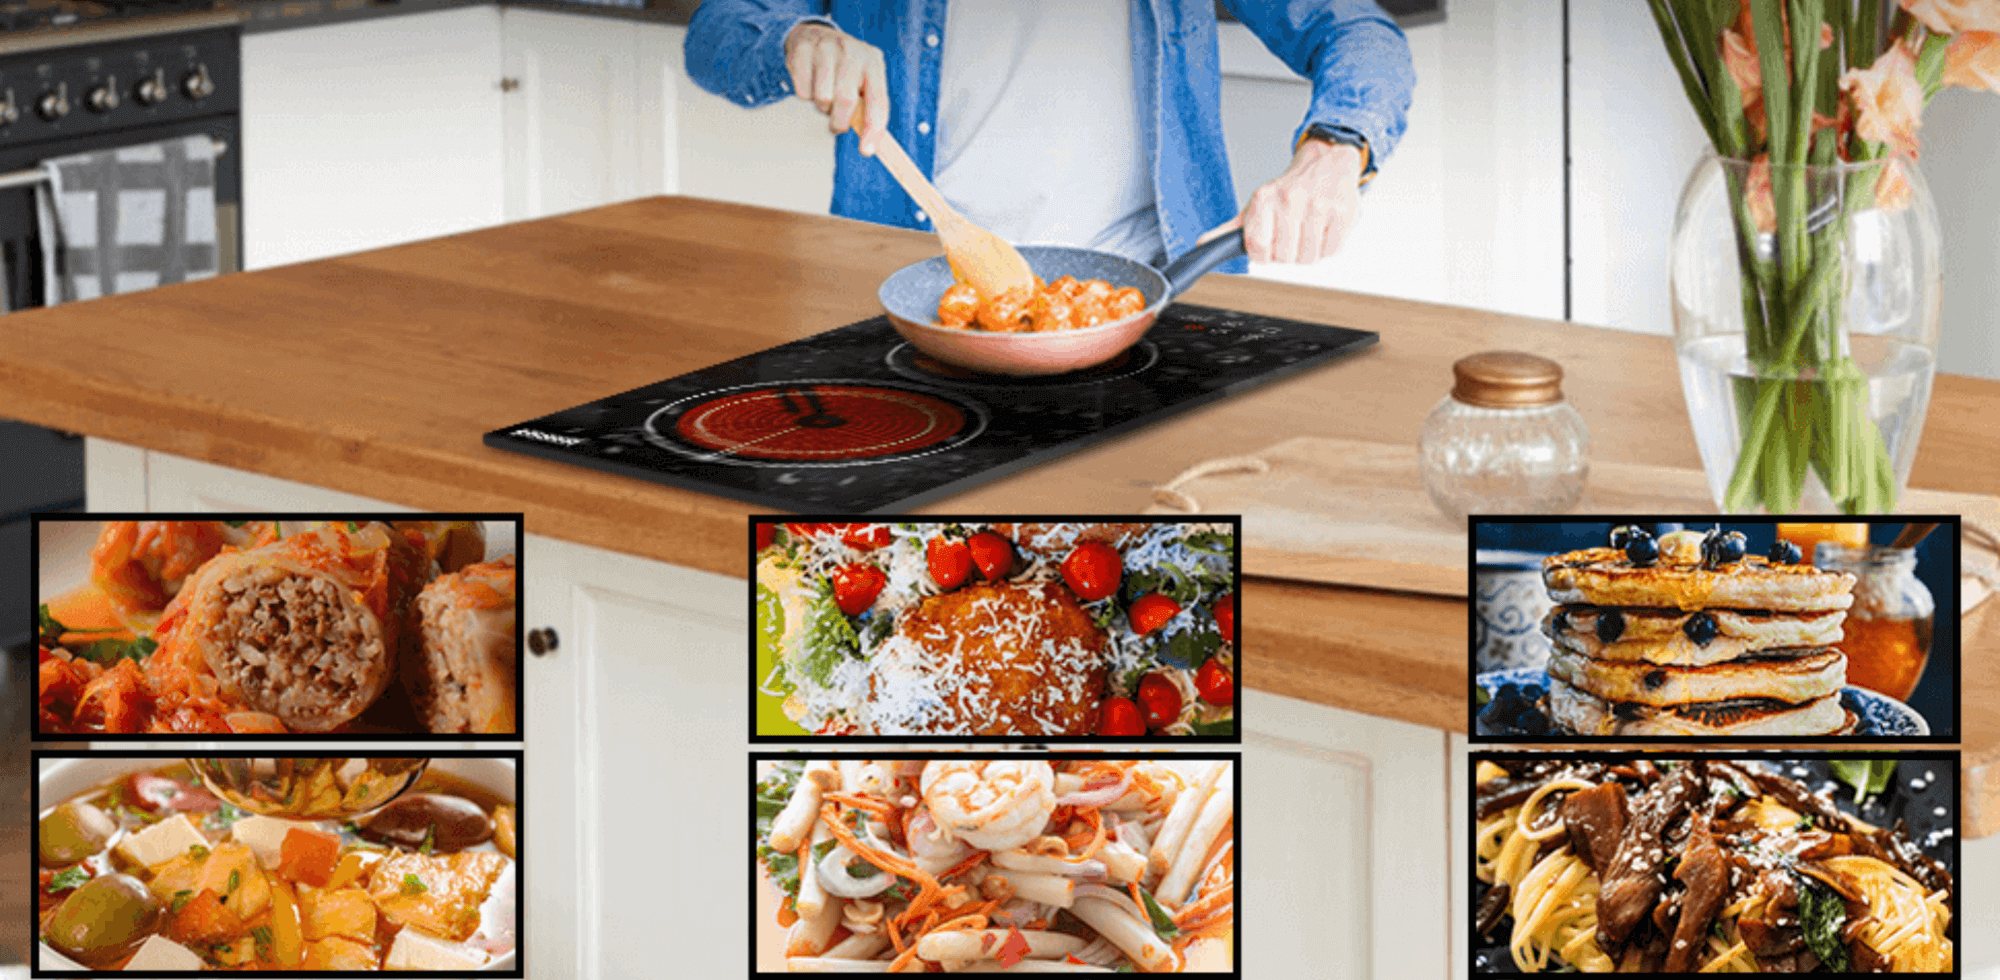 2 Burners Electric Cooktop working simultaneously with a total power of 2000W, built-in electric stove top fast heating without waiting, electric stove helps you simmer, fry, boil, bake, steam, slow cook and grill with ease.